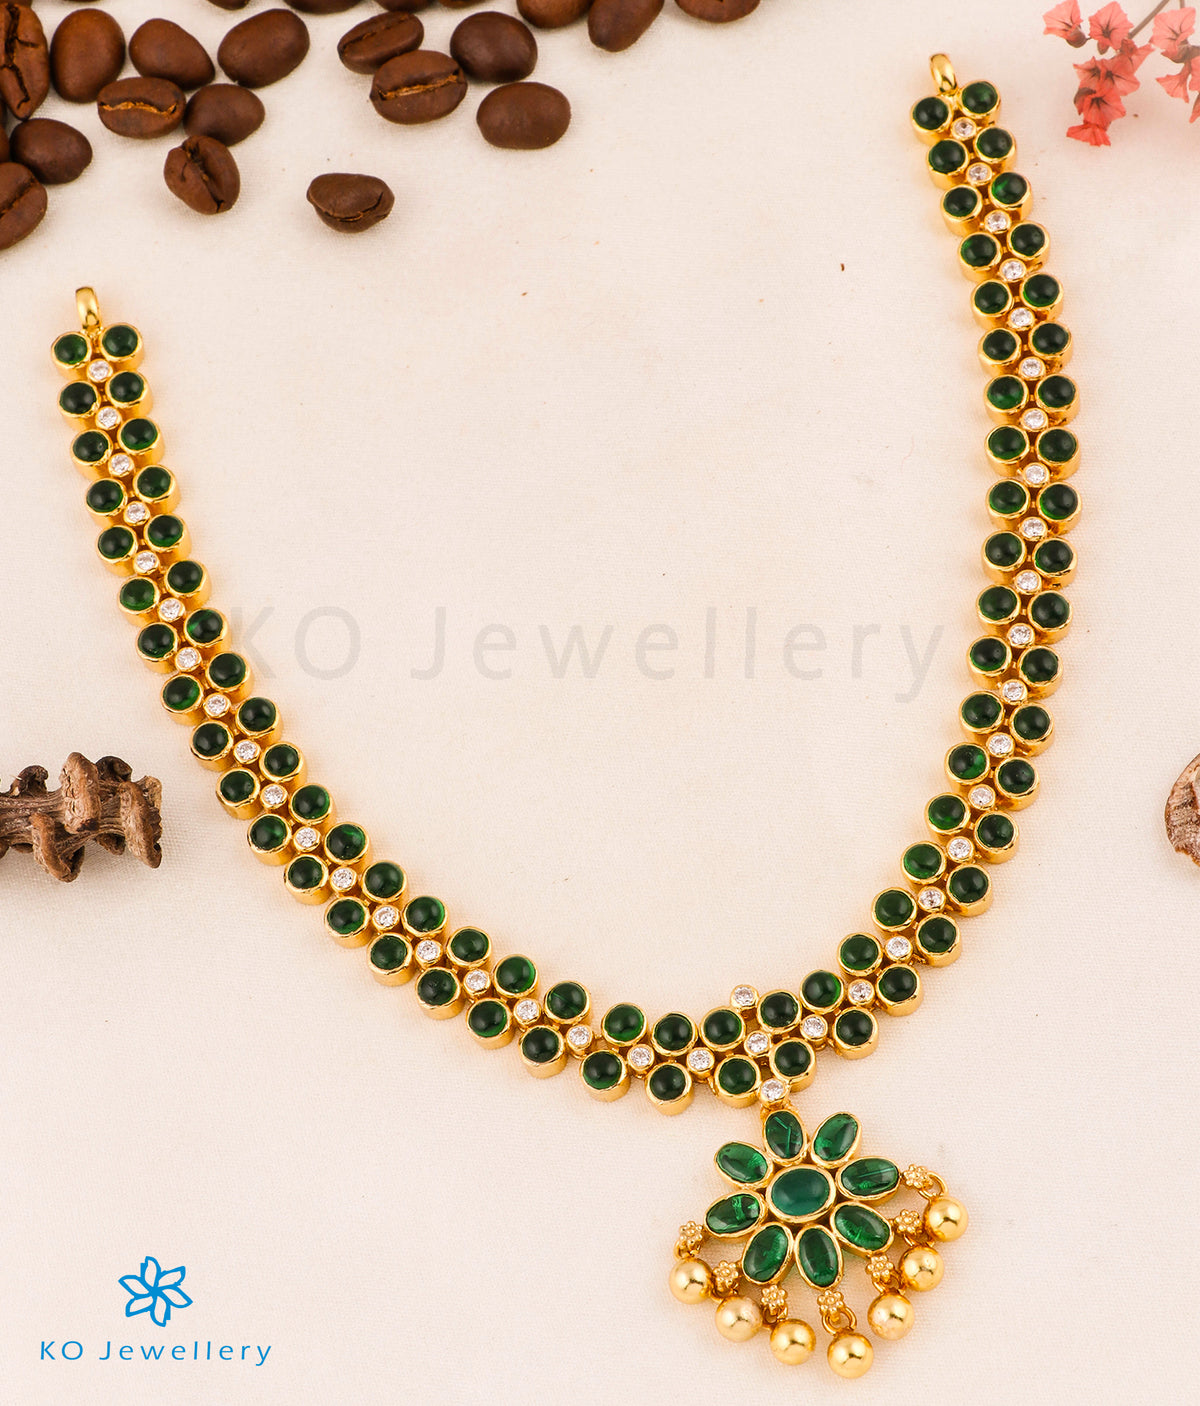 Cz American diamond jewelry Star necklace | Green Emerald necklace | I –  Indian Designs